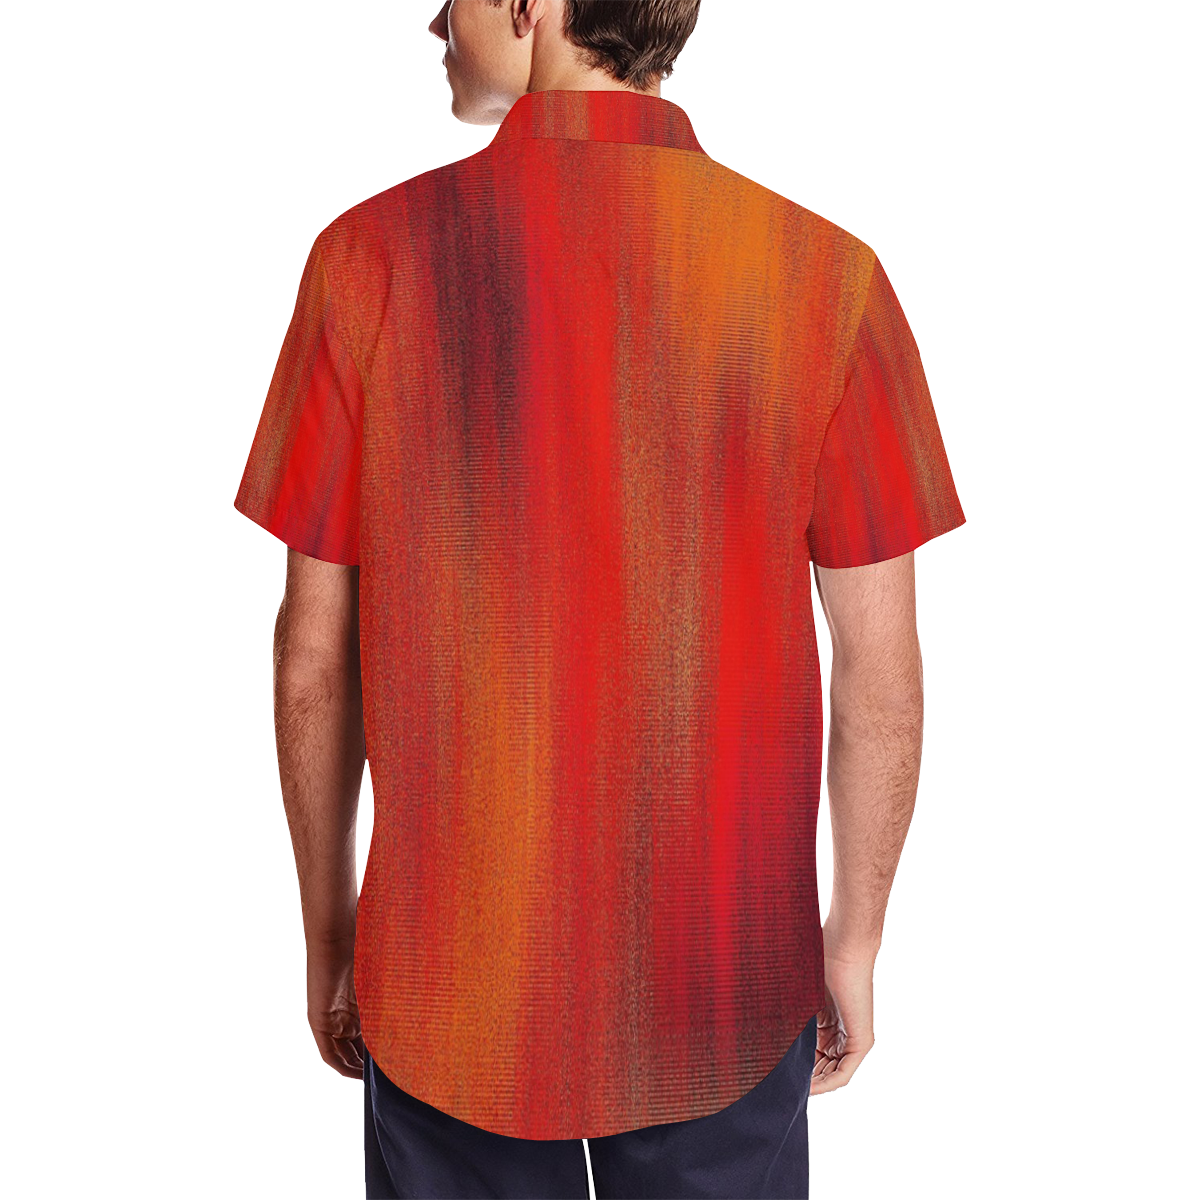 Red Flames Men's Short Sleeve Shirt with Lapel Collar (Model T54)